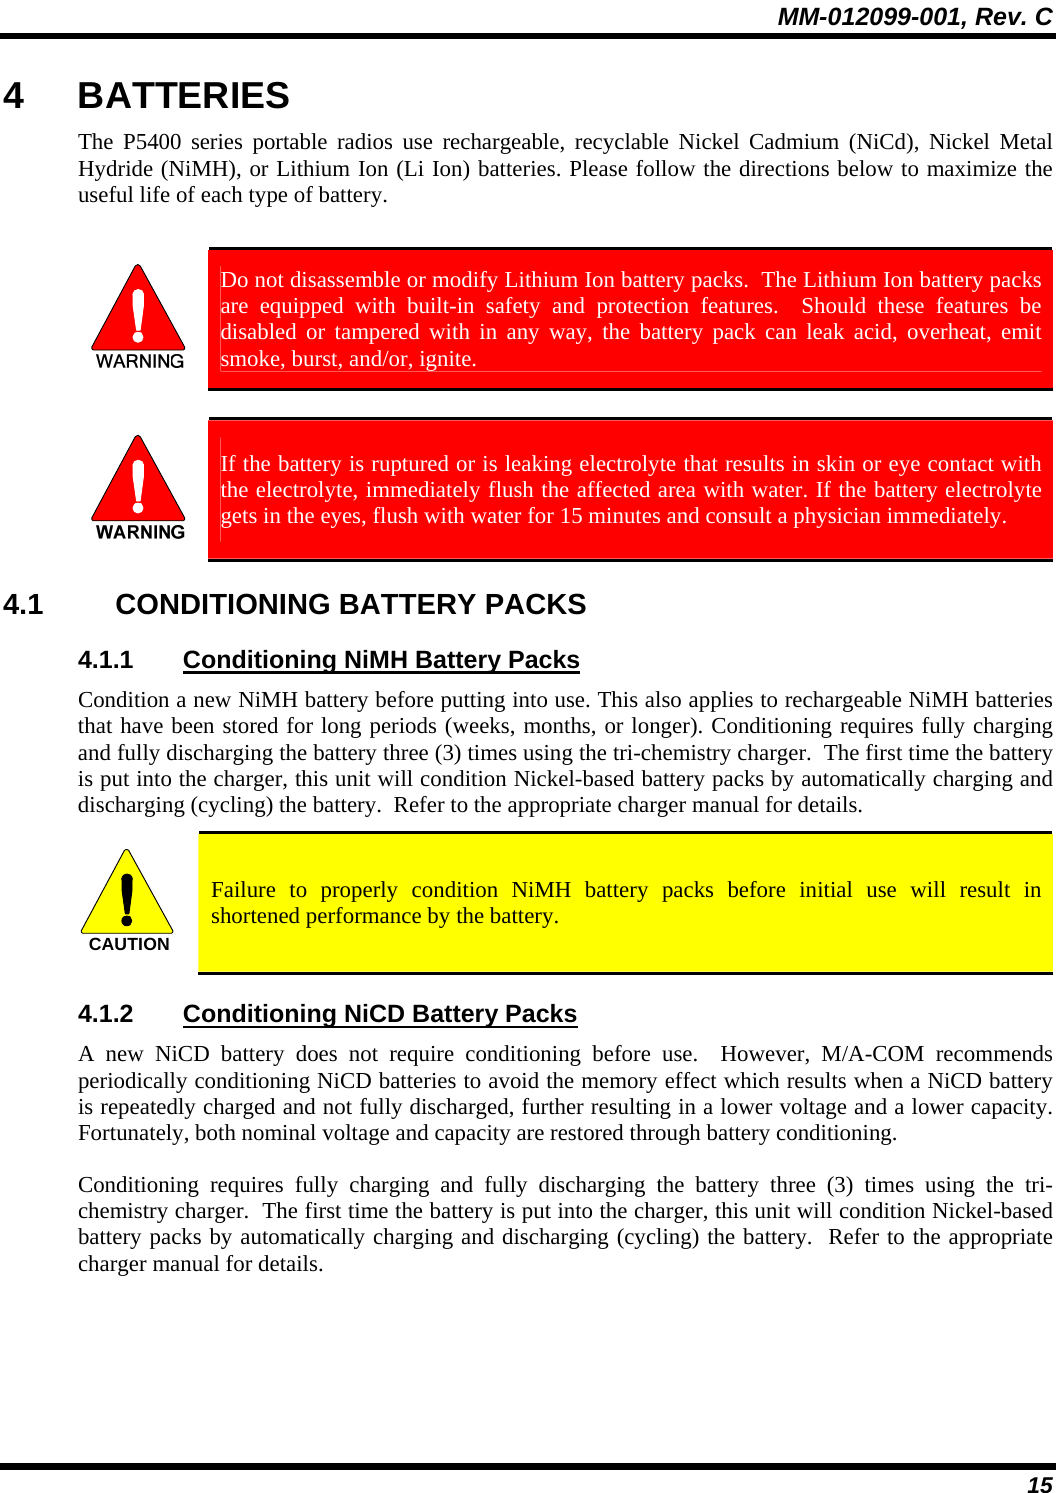 MM-012099-001, Rev. C 15 4 BATTERIES The P5400 series portable radios use rechargeable, recyclable Nickel Cadmium (NiCd), Nickel Metal Hydride (NiMH), or Lithium Ion (Li Ion) batteries. Please follow the directions below to maximize the useful life of each type of battery.   Do not disassemble or modify Lithium Ion battery packs.  The Lithium Ion battery packs are equipped with built-in safety and protection features.  Should these features be disabled or tampered with in any way, the battery pack can leak acid, overheat, emit smoke, burst, and/or, ignite.   If the battery is ruptured or is leaking electrolyte that results in skin or eye contact with the electrolyte, immediately flush the affected area with water. If the battery electrolyte gets in the eyes, flush with water for 15 minutes and consult a physician immediately. 4.1 CONDITIONING BATTERY PACKS 4.1.1  Conditioning NiMH Battery Packs Condition a new NiMH battery before putting into use. This also applies to rechargeable NiMH batteries that have been stored for long periods (weeks, months, or longer). Conditioning requires fully charging and fully discharging the battery three (3) times using the tri-chemistry charger.  The first time the battery is put into the charger, this unit will condition Nickel-based battery packs by automatically charging and discharging (cycling) the battery.  Refer to the appropriate charger manual for details. CAUTION  Failure to properly condition NiMH battery packs before initial use will result in shortened performance by the battery. 4.1.2  Conditioning NiCD Battery Packs A new NiCD battery does not require conditioning before use.  However, M/A-COM recommends periodically conditioning NiCD batteries to avoid the memory effect which results when a NiCD battery is repeatedly charged and not fully discharged, further resulting in a lower voltage and a lower capacity. Fortunately, both nominal voltage and capacity are restored through battery conditioning.   Conditioning requires fully charging and fully discharging the battery three (3) times using the tri-chemistry charger.  The first time the battery is put into the charger, this unit will condition Nickel-based battery packs by automatically charging and discharging (cycling) the battery.  Refer to the appropriate charger manual for details.  